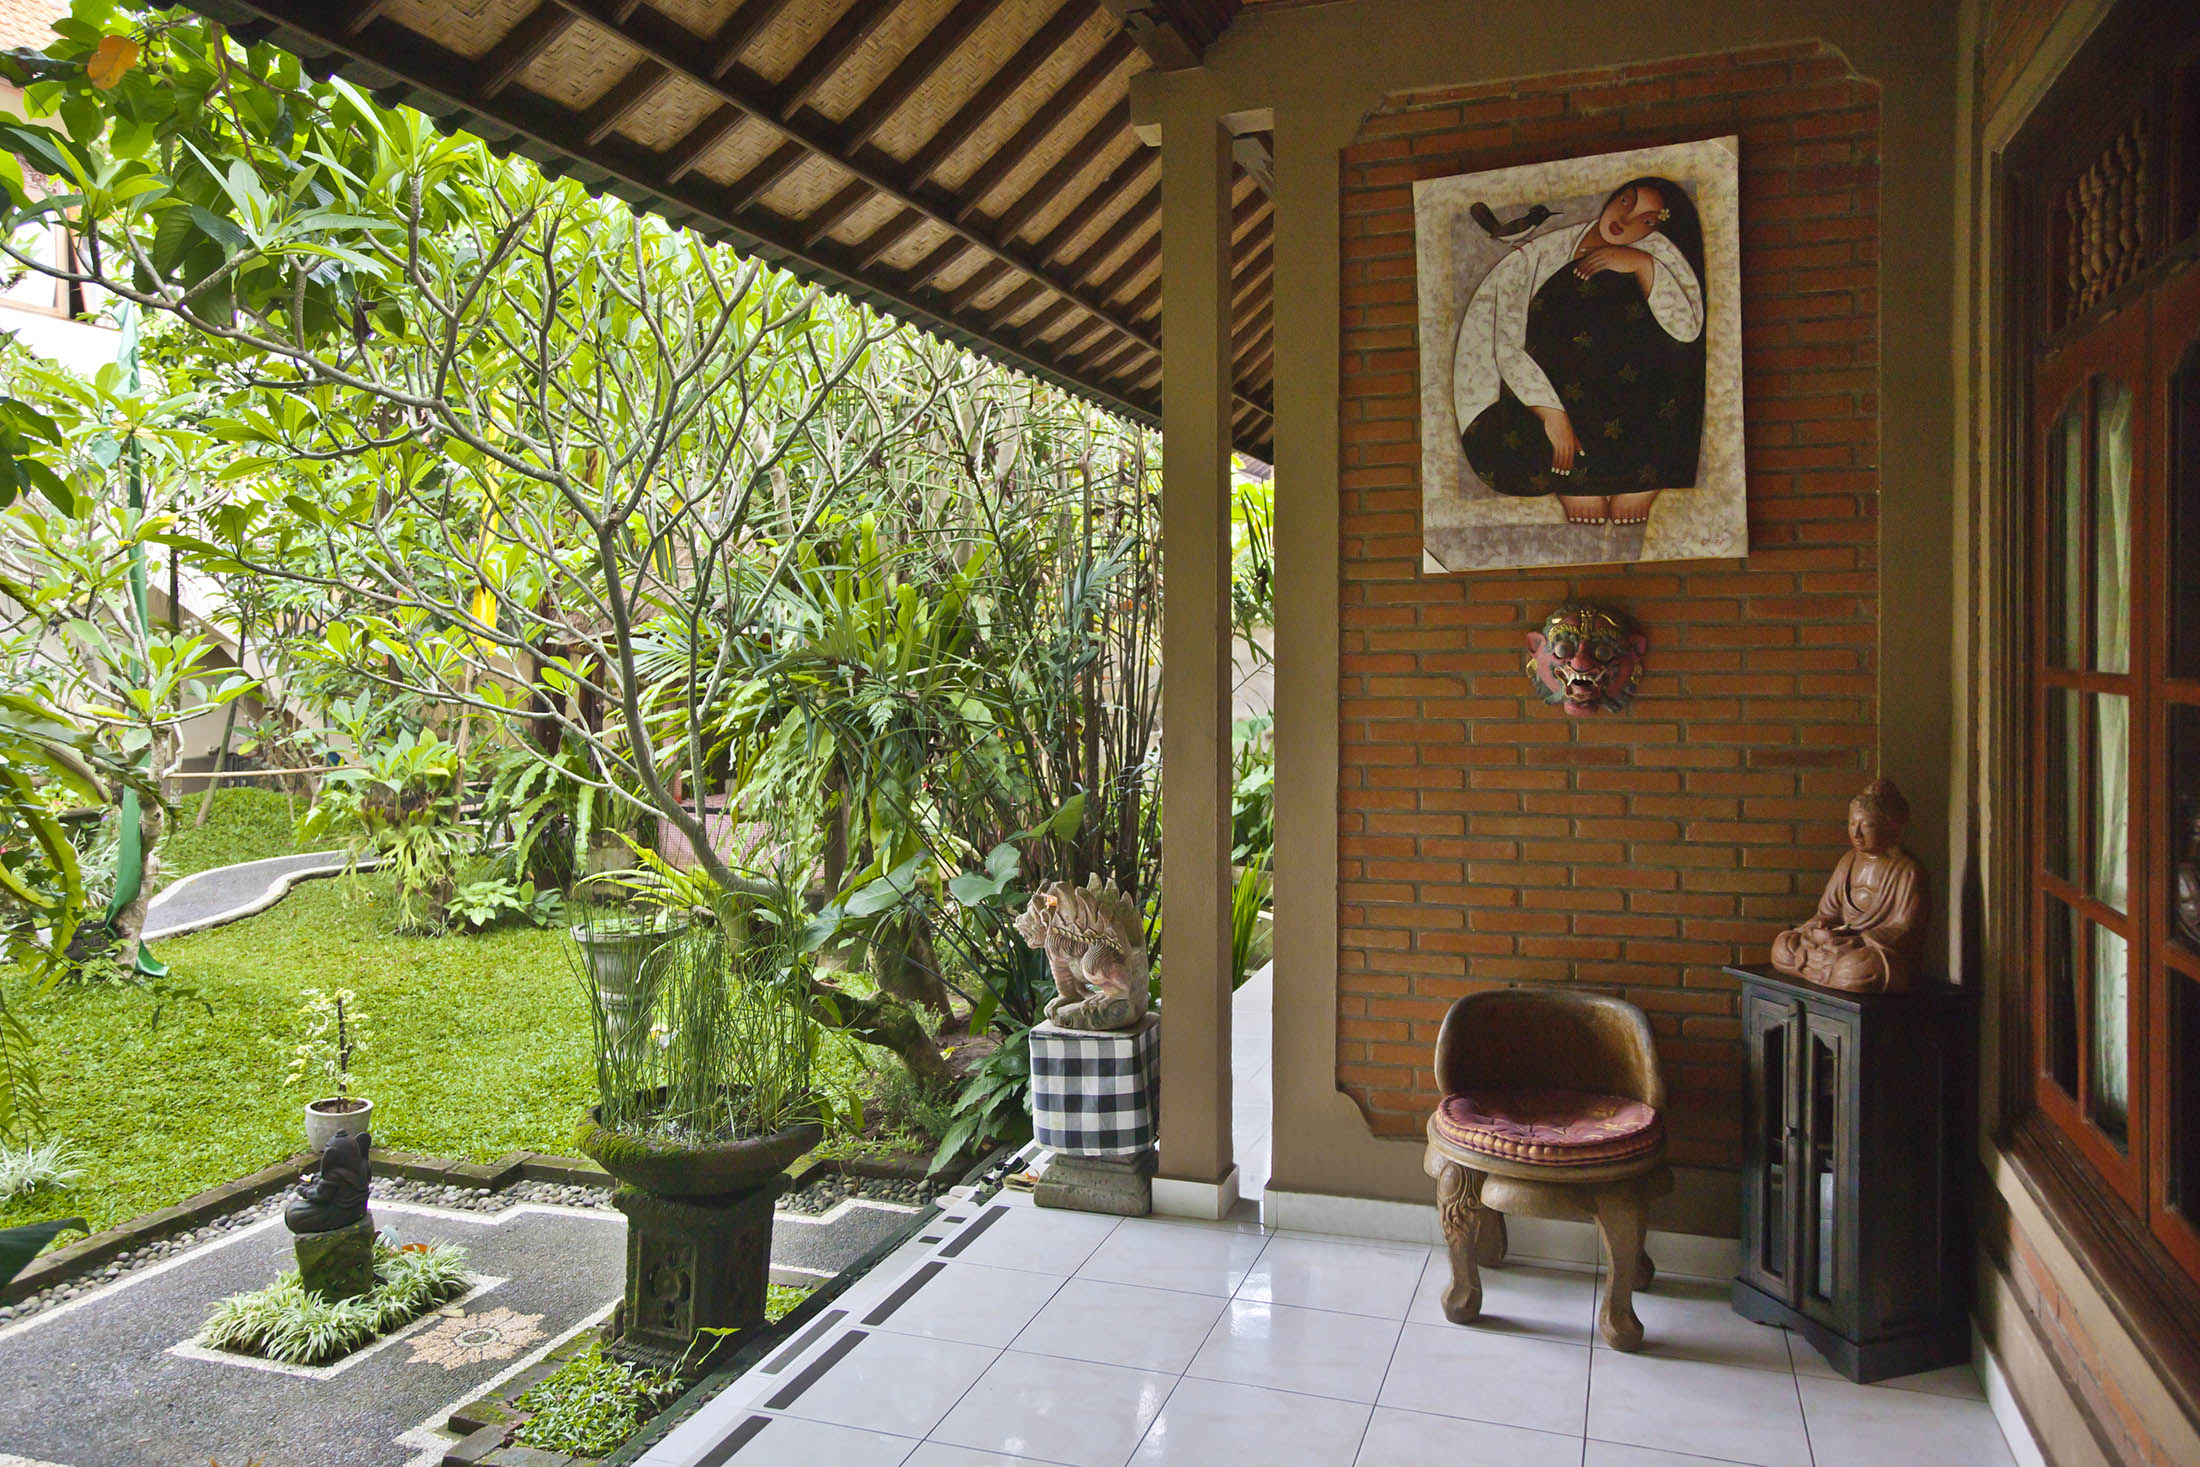 Balinese home in Ubud, Bali. Indonesian President Joko Widodo has signed a long-awaited rule allowing resident foreigners to purchase so-called “right-to-use” property titles for 30 years, five years longer than a previous 1996 regulation, with a possible extension of up to 50 more years.
